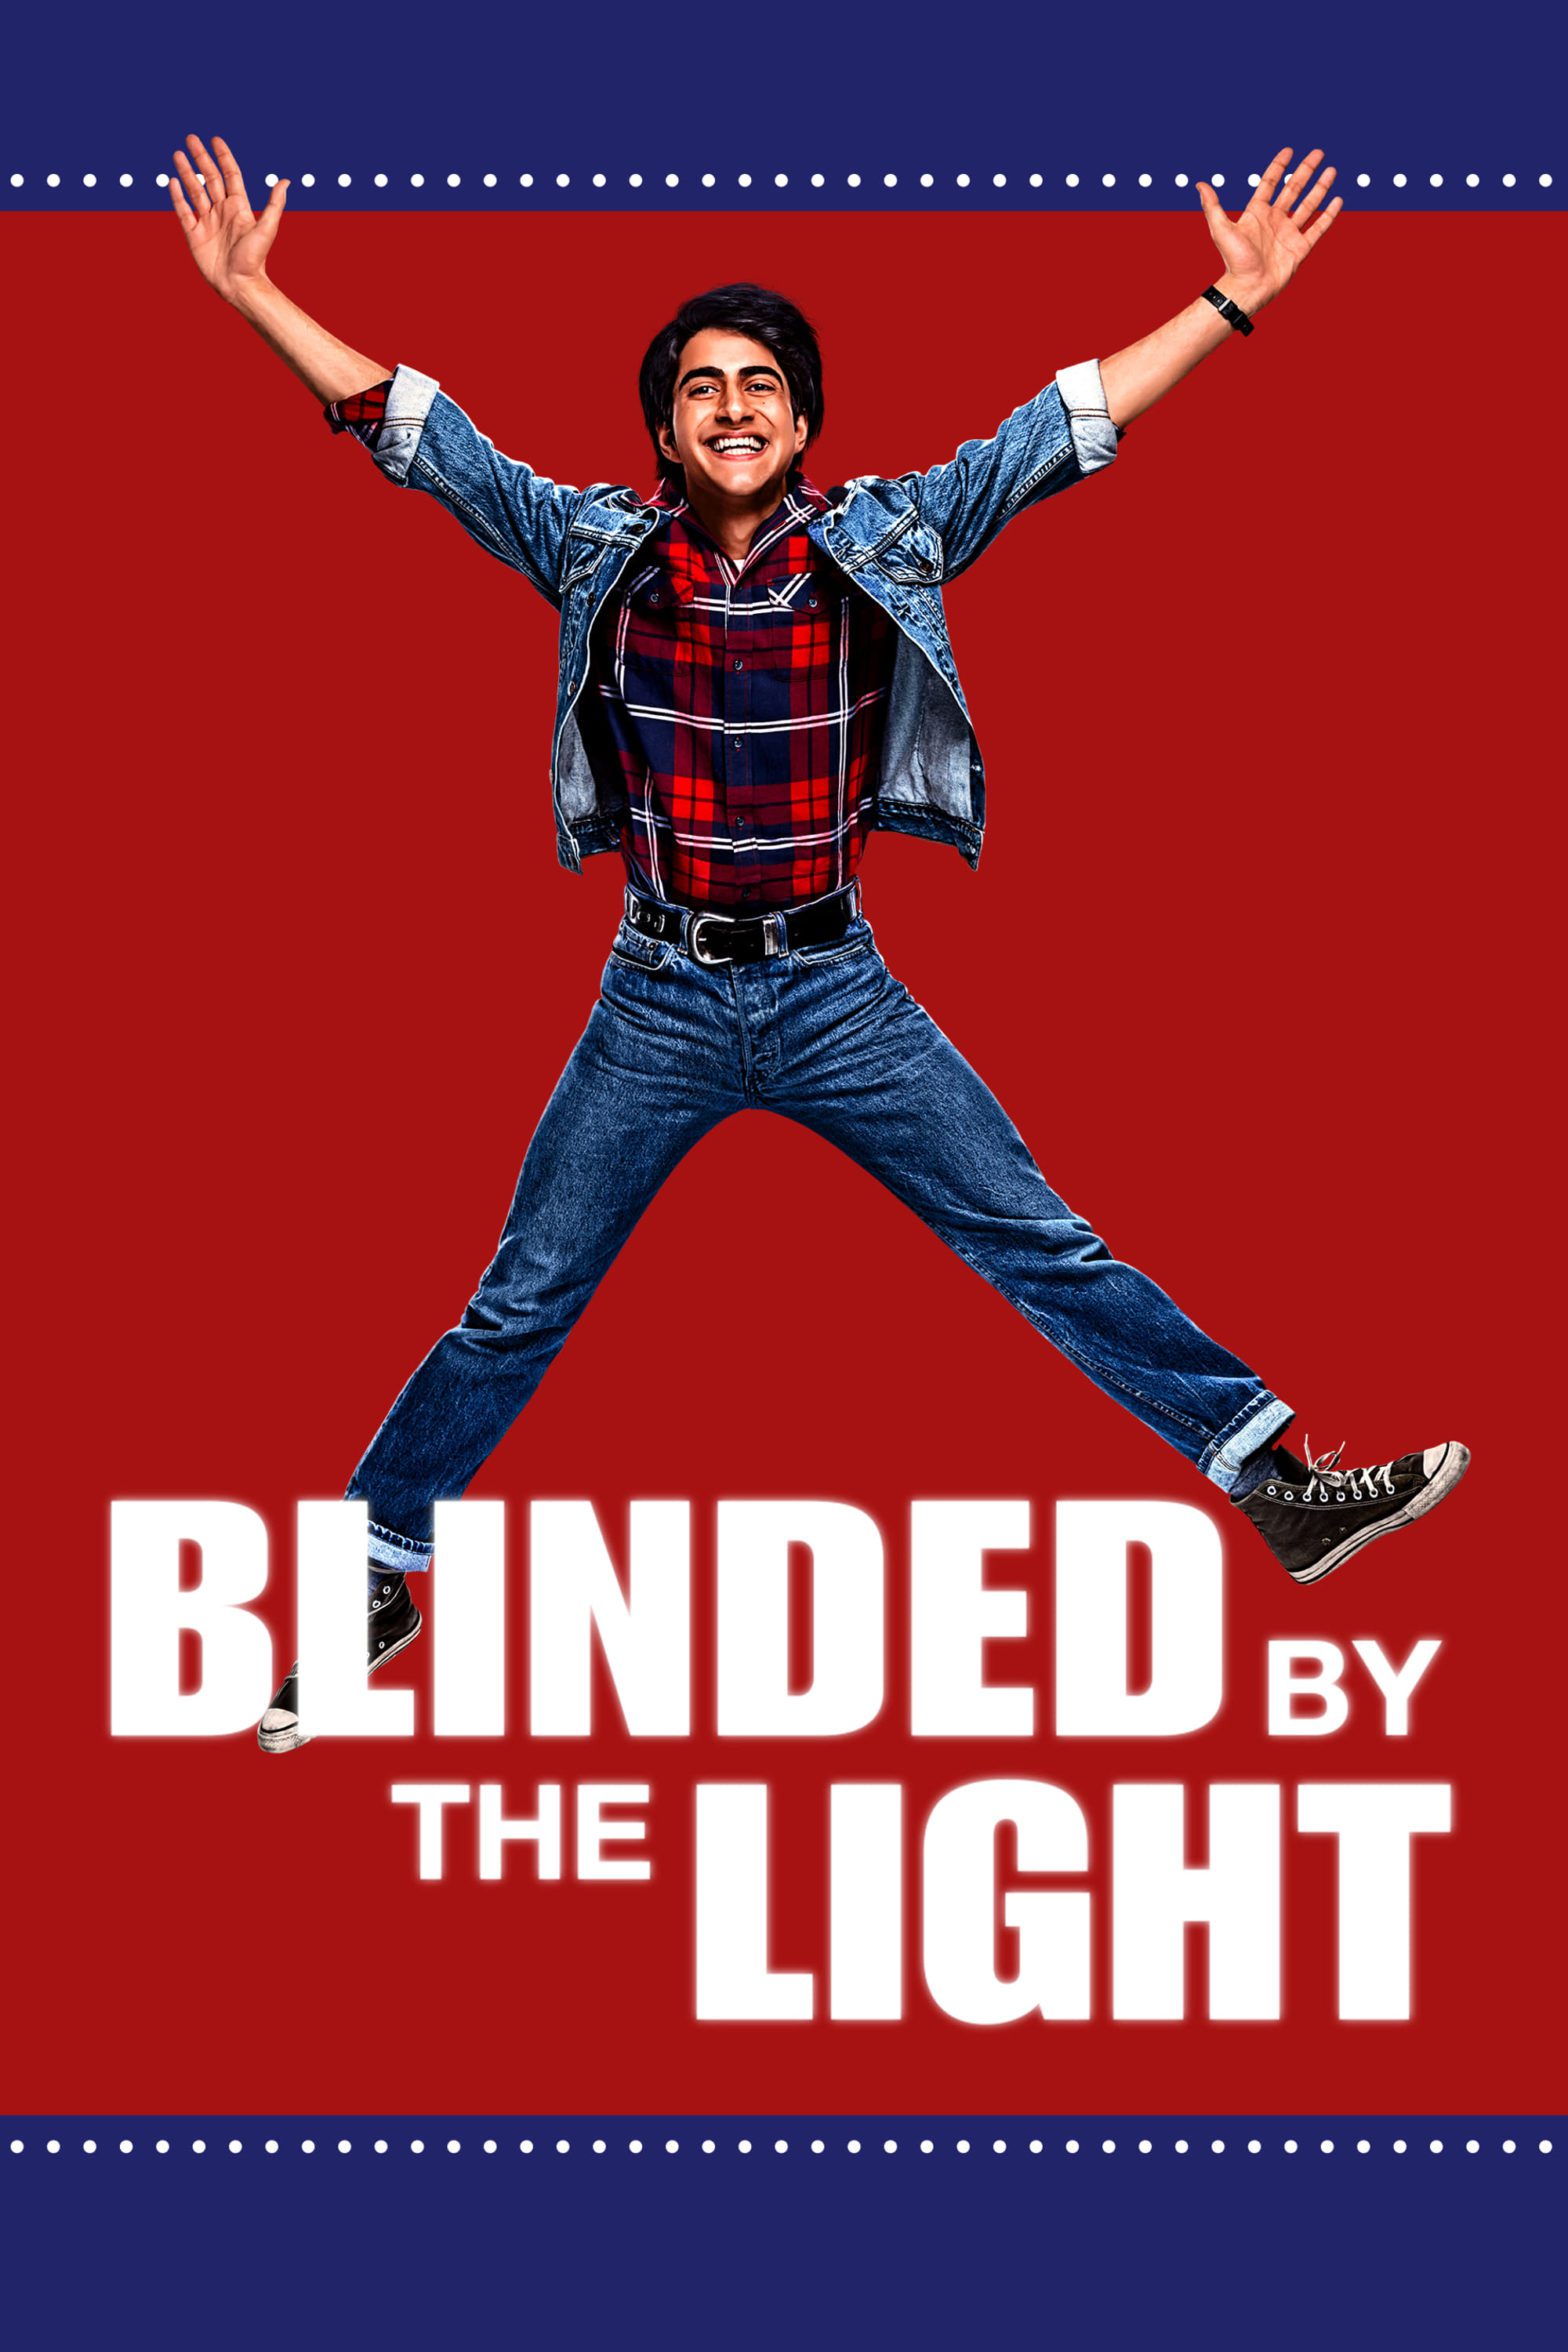 Poster for the movie "Blinded by the Light"